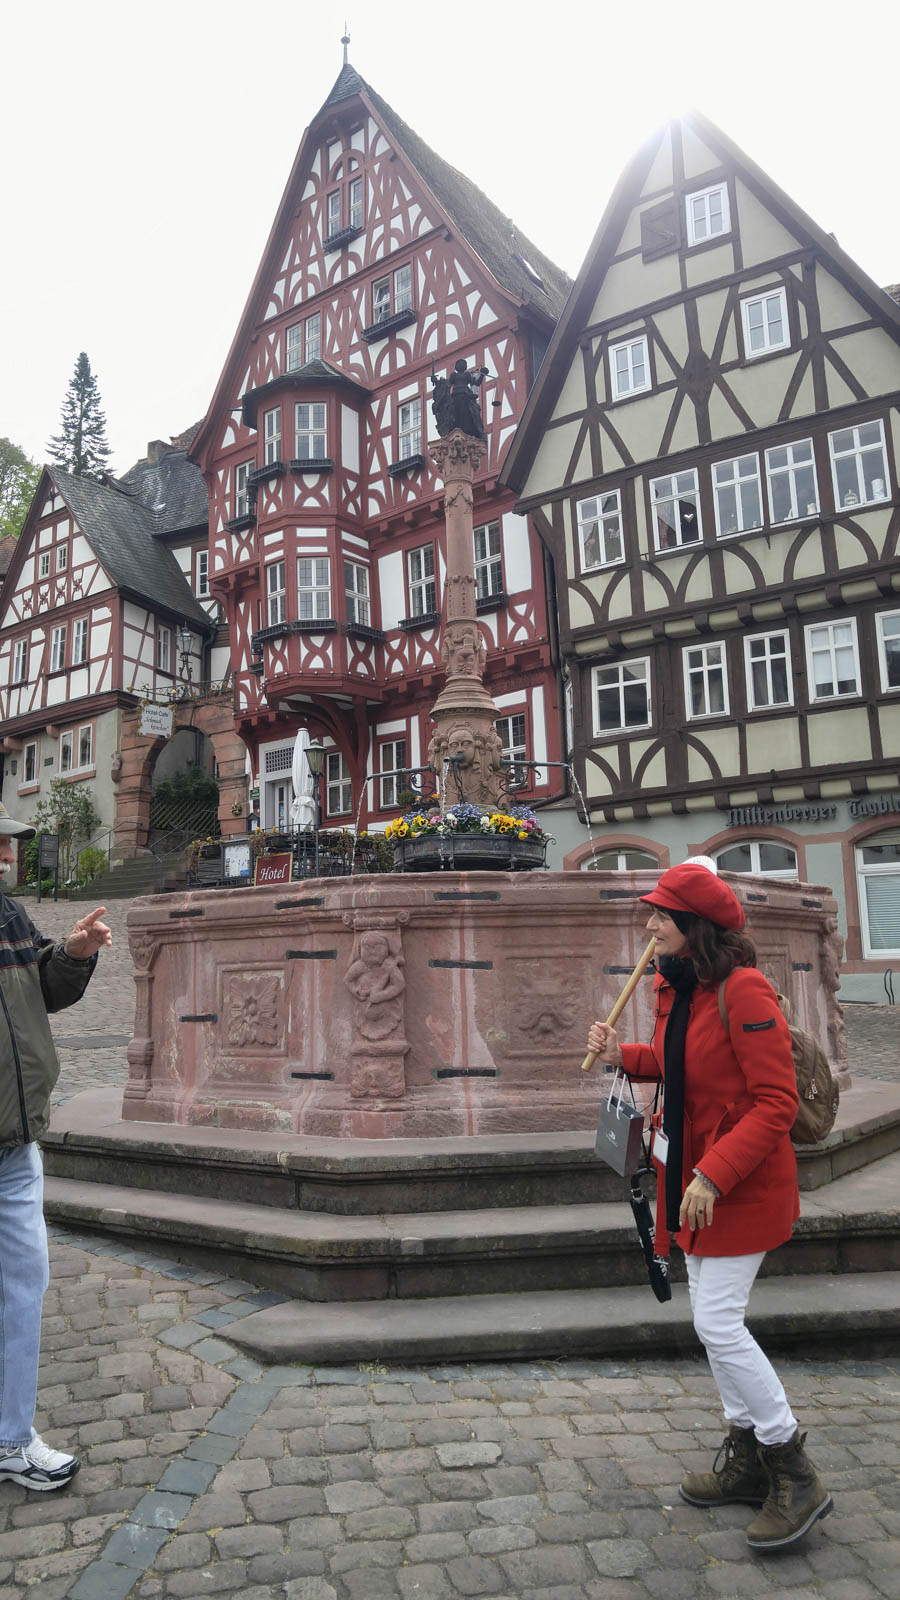 Cruise Day #5 - Visit to Miltenberg Germany 4/27/2017